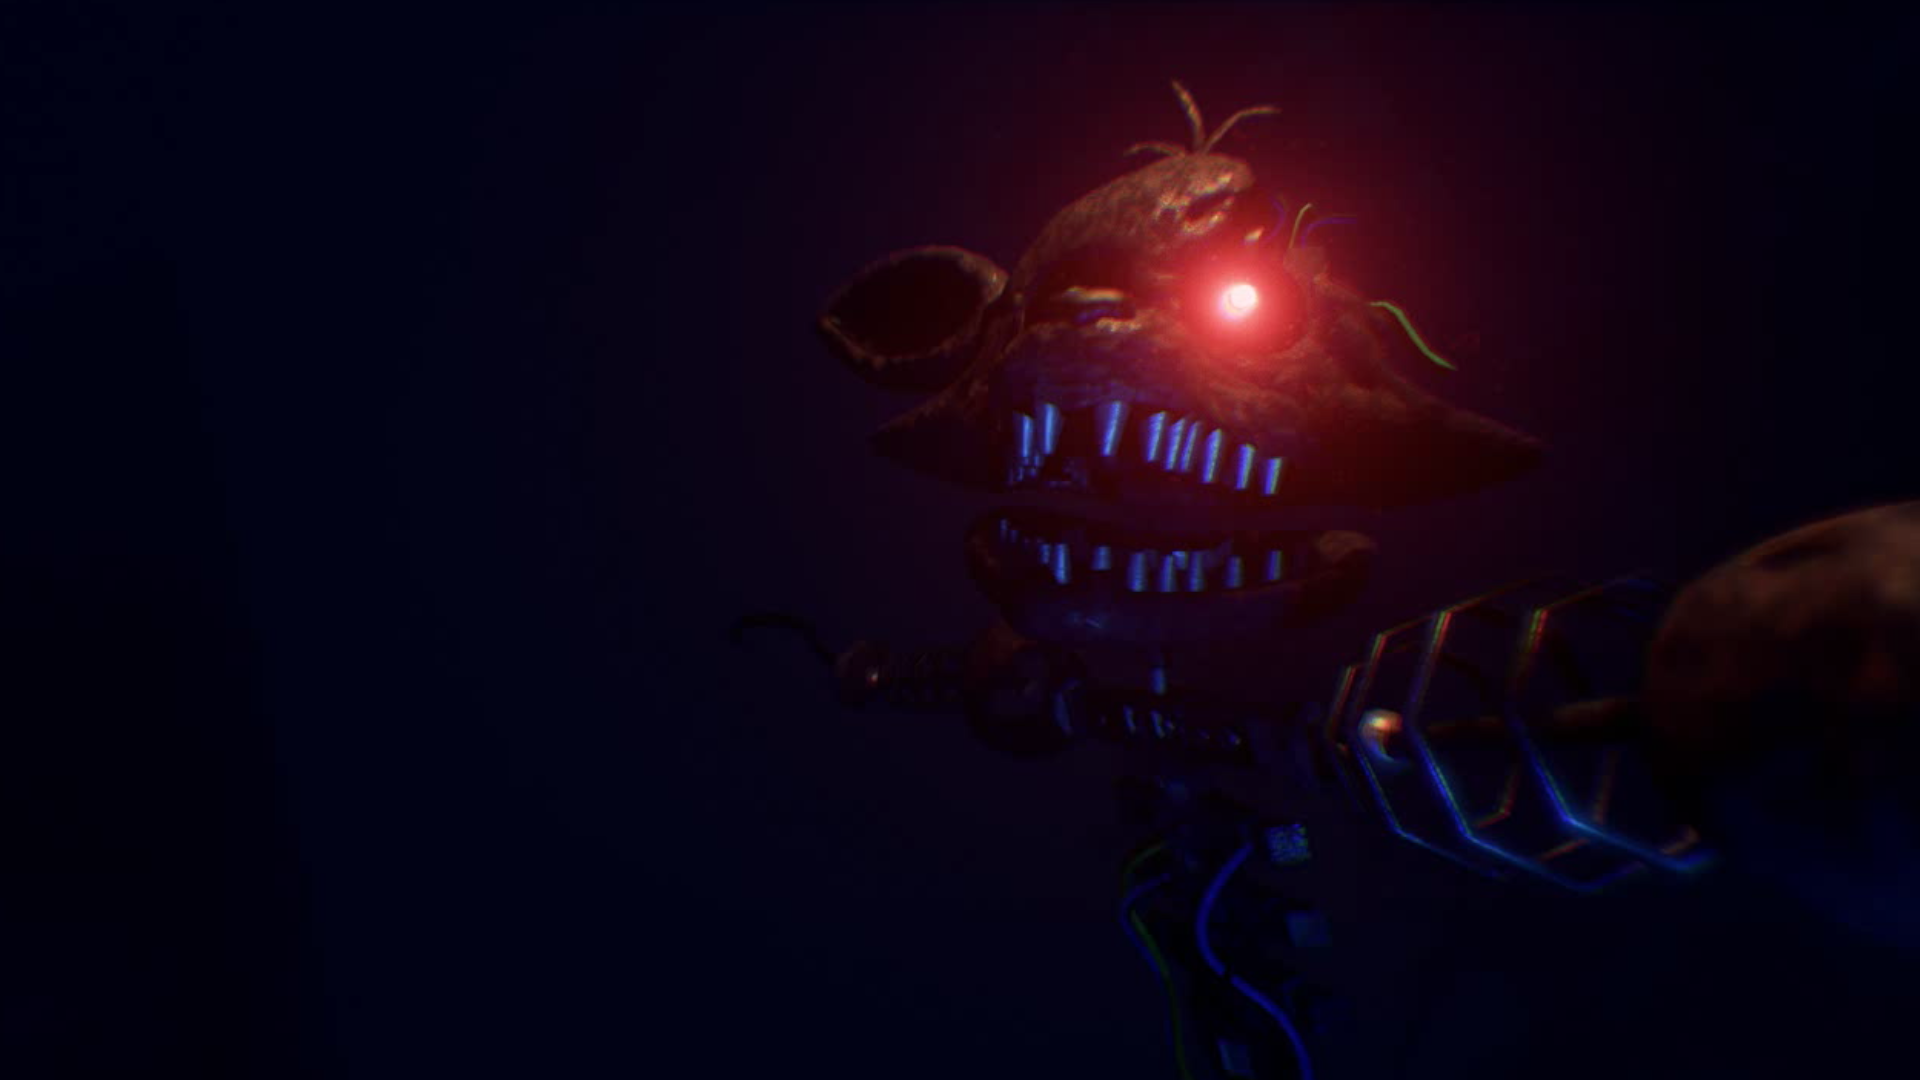 fnaf 4 halloween update for android